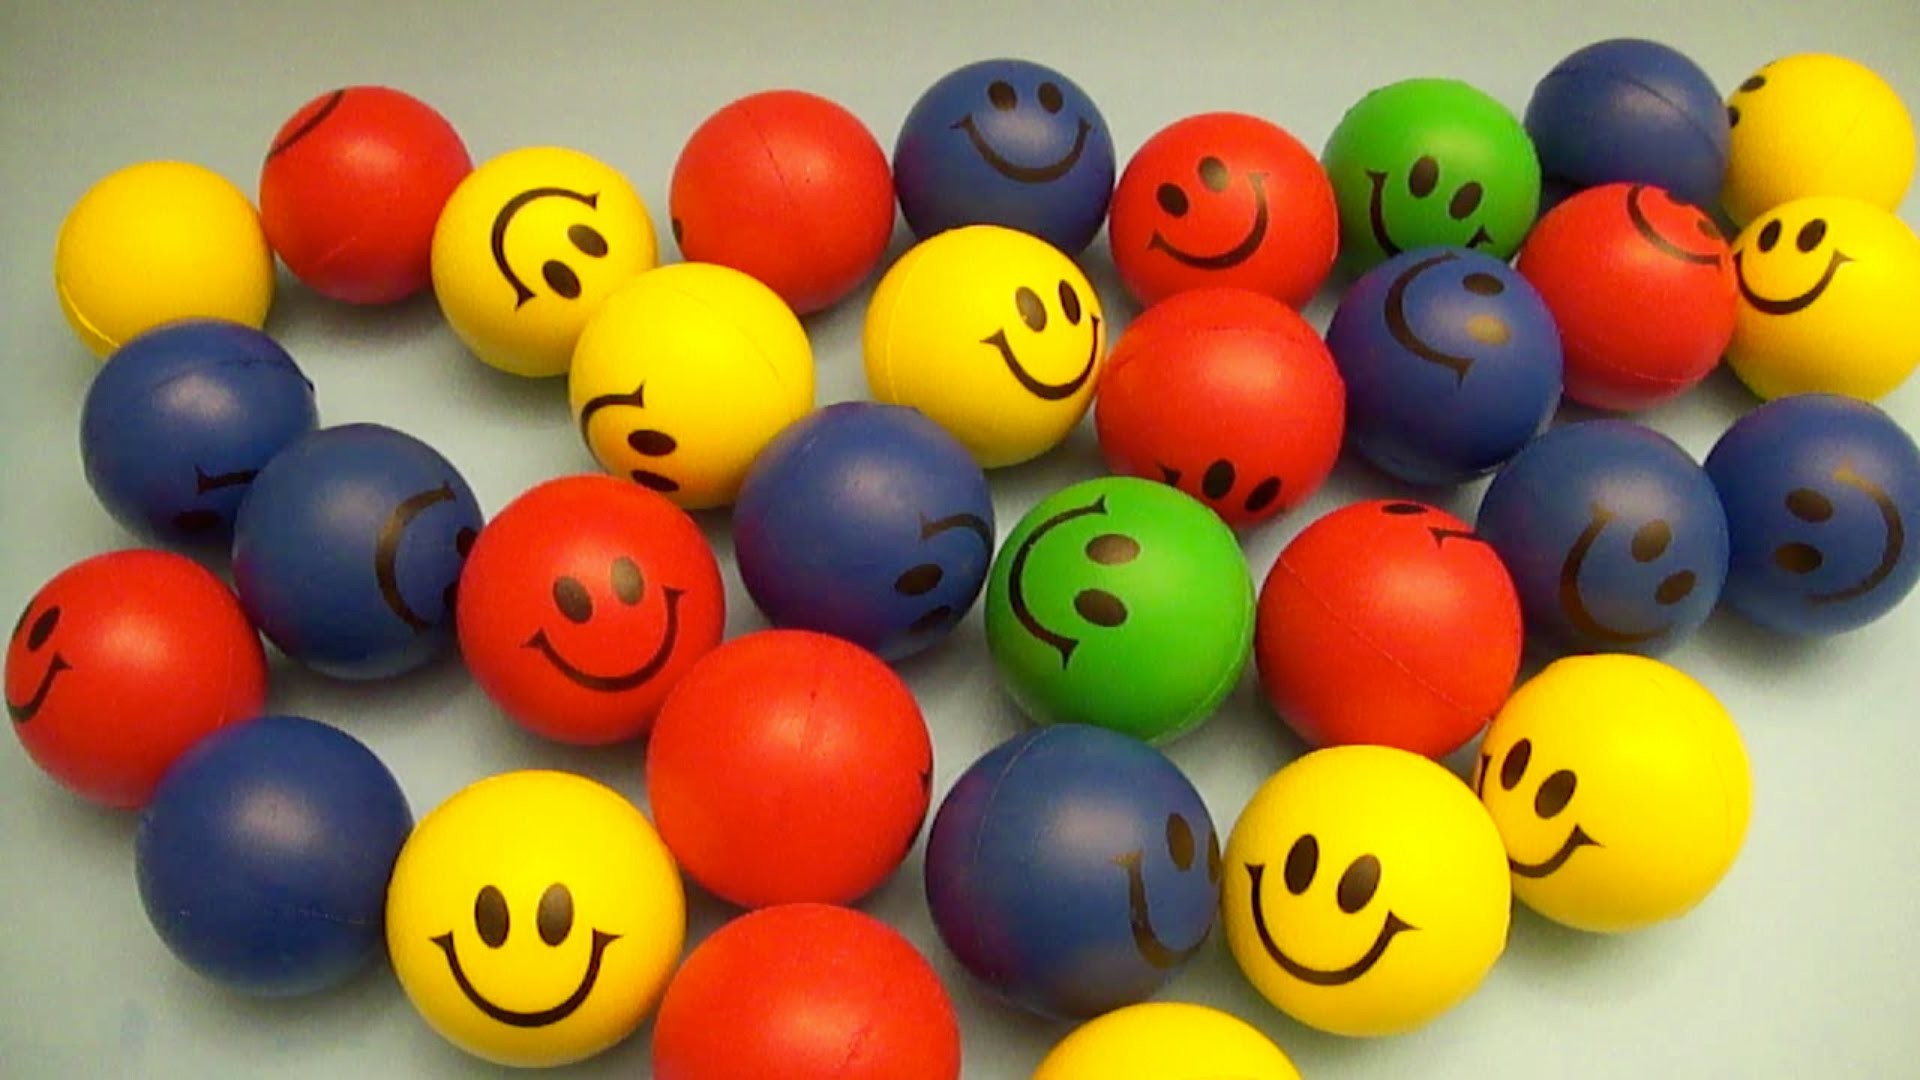 Learn Colours With Huge Smiley Face Squishy Balls Fun Smiley Wallpaper HD